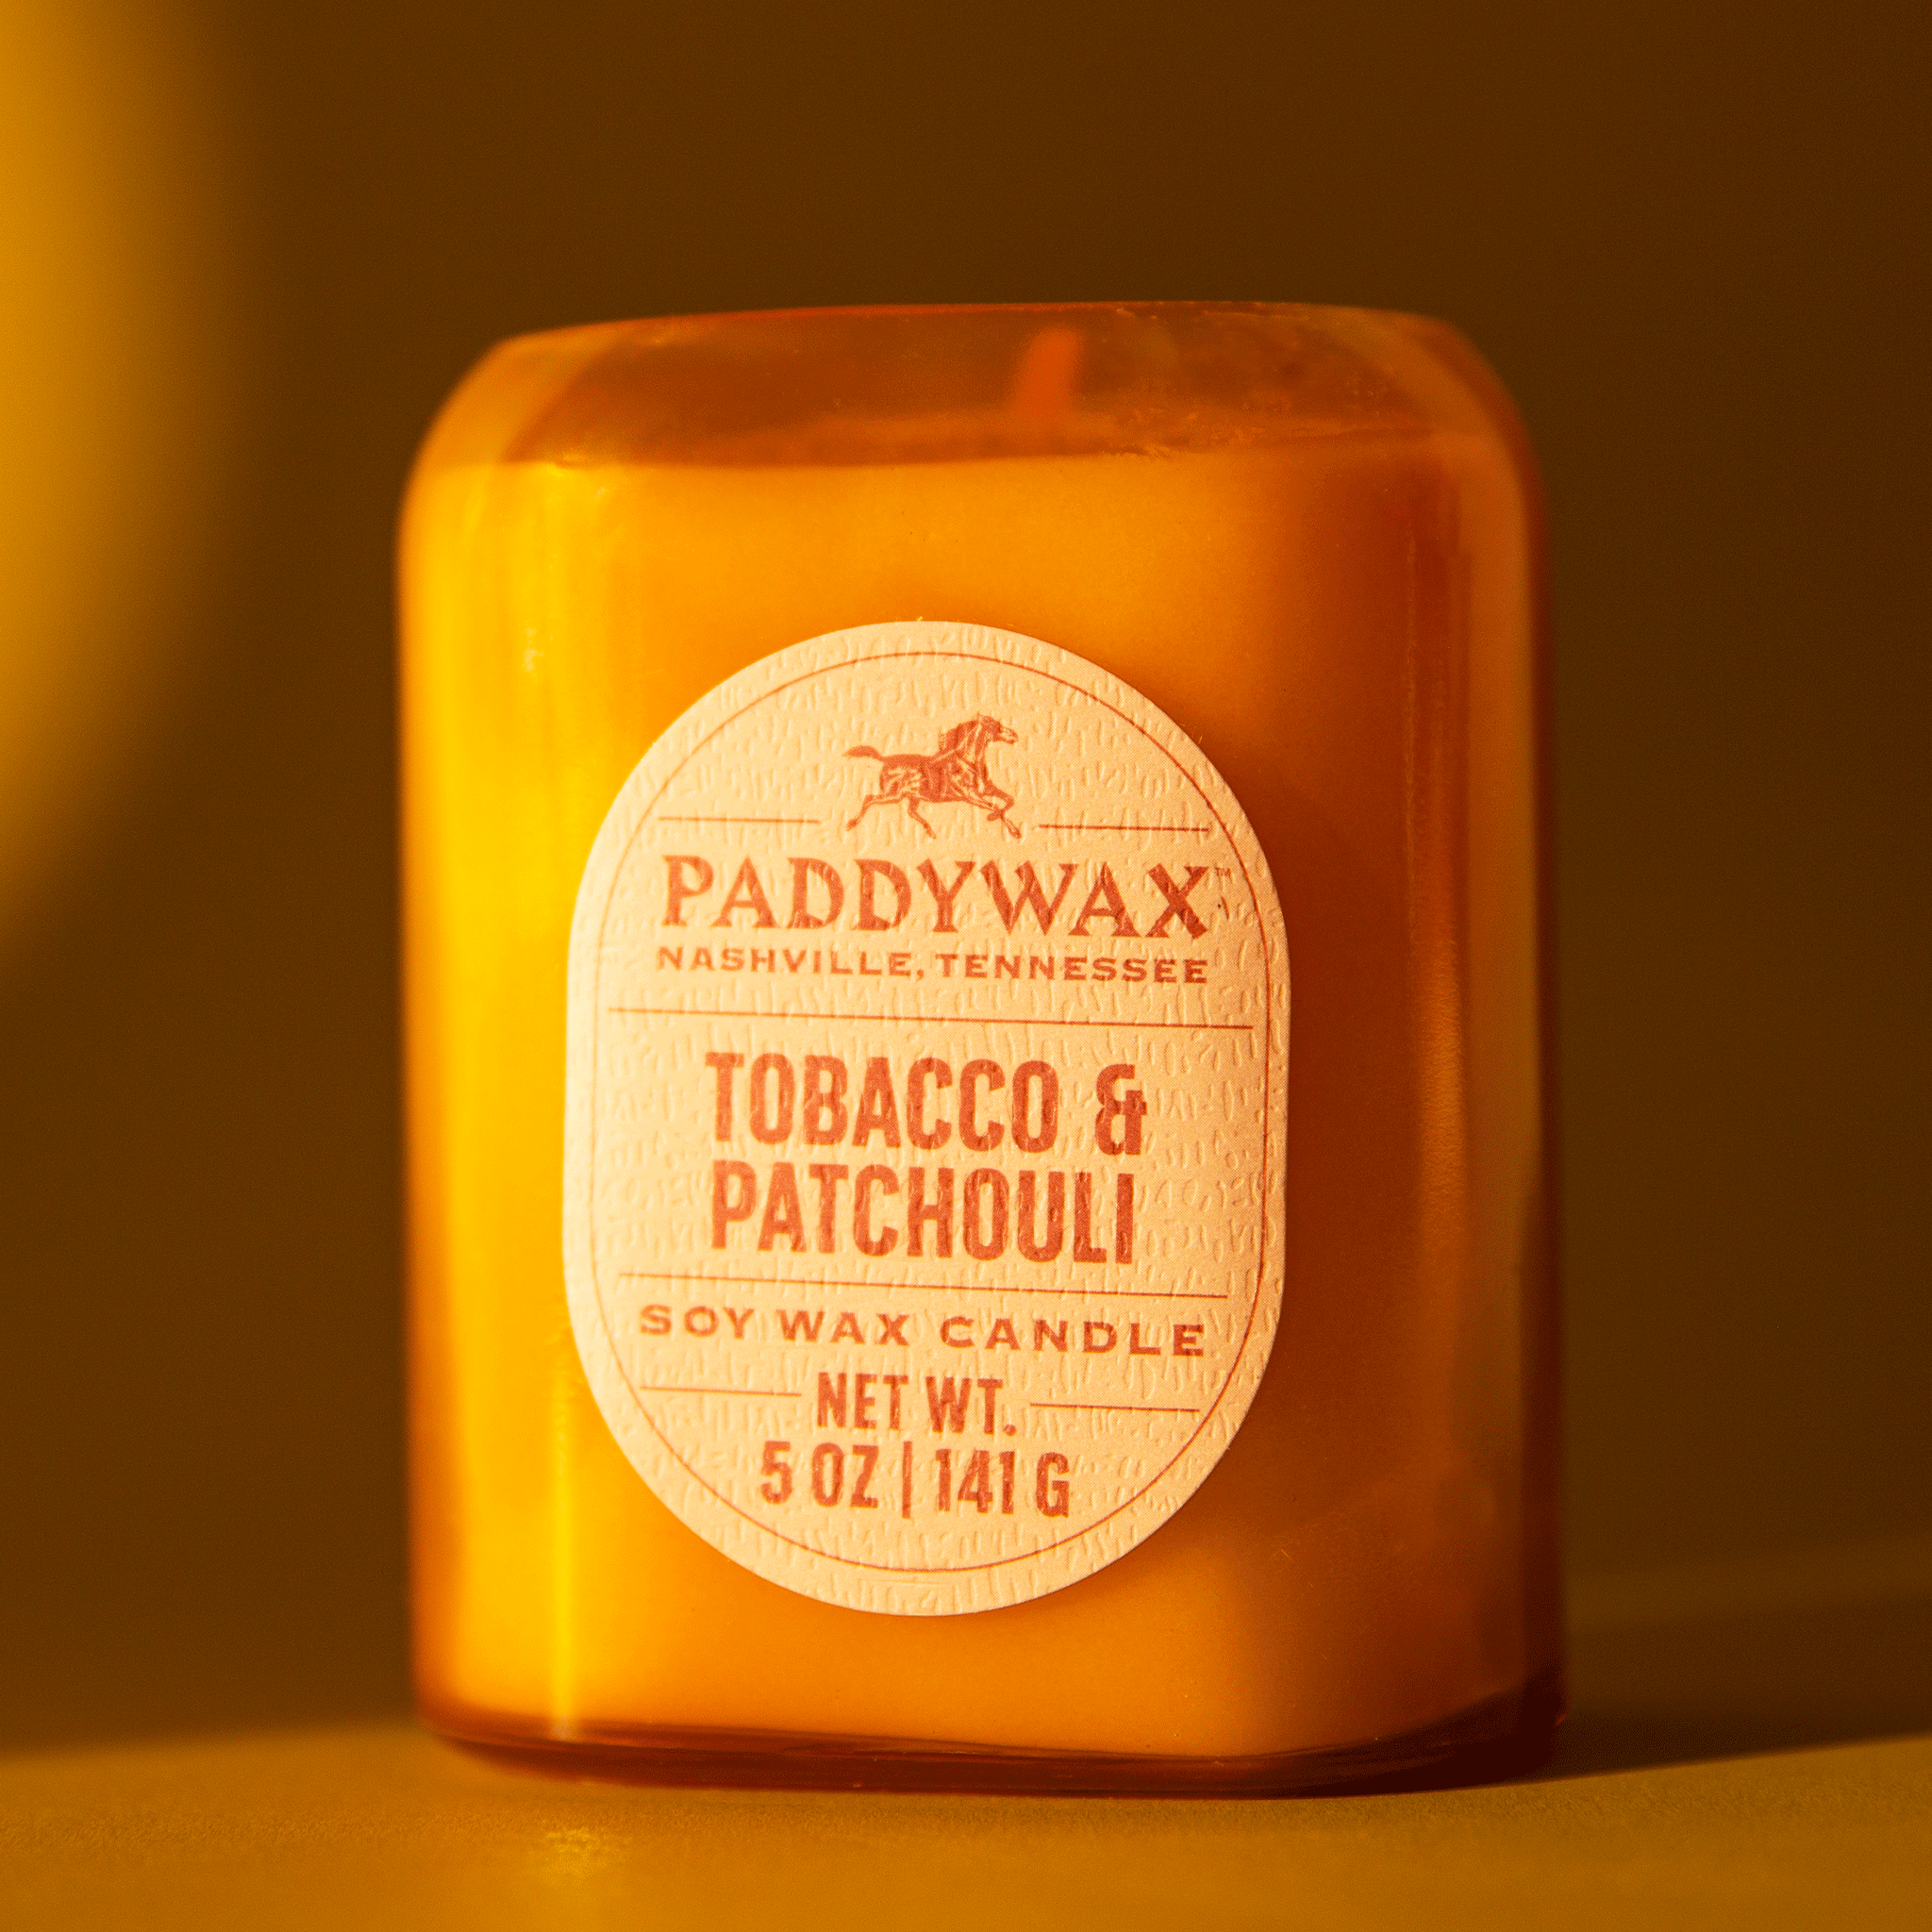 On a burnt orange background is a glass jar candle with an oval label in the center that reads, "Paddywax Tobacco Patchouli". 